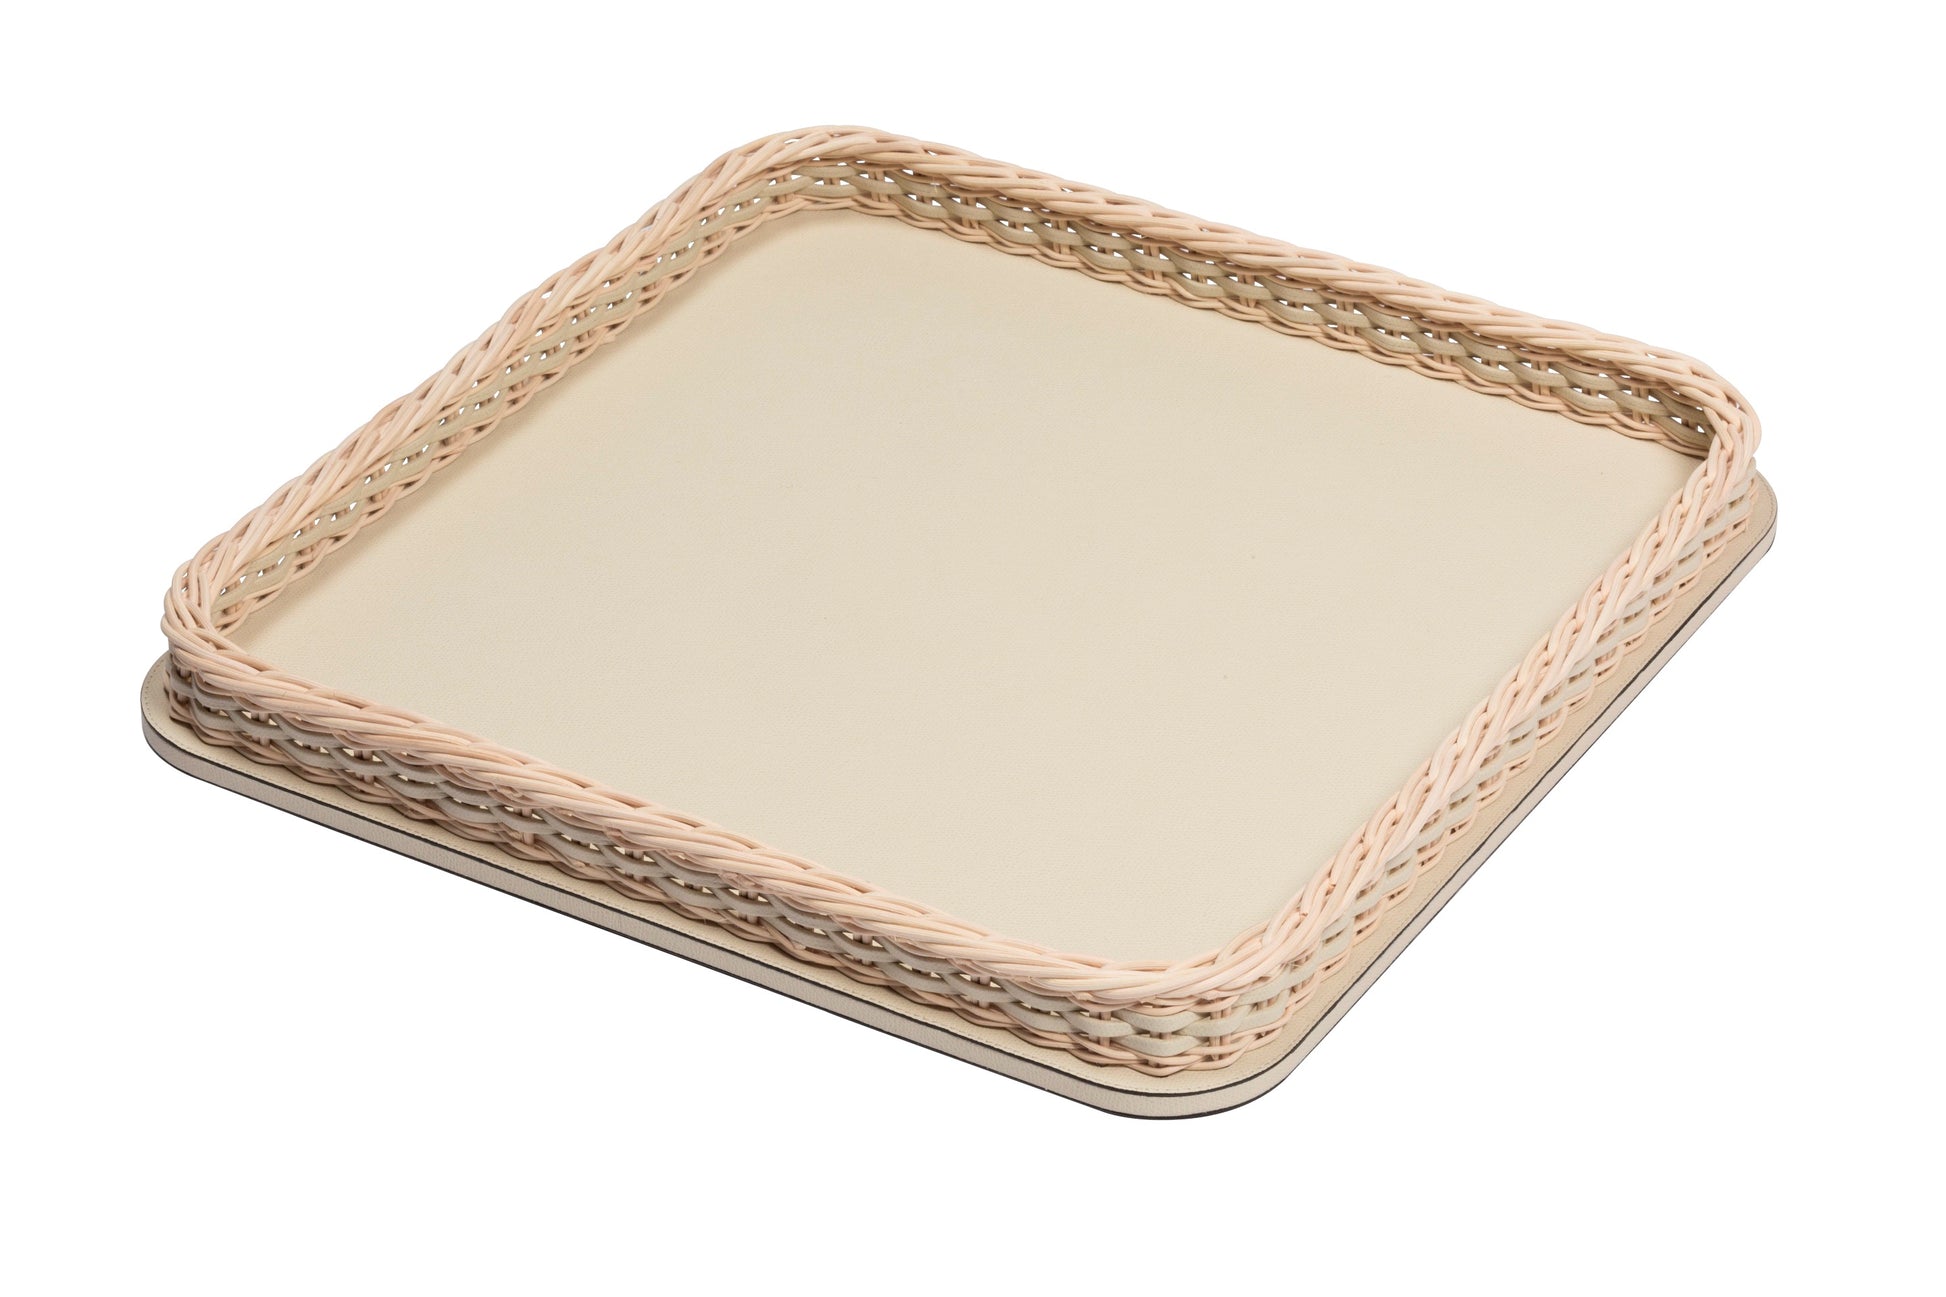 Pigment France Orsay Square Leather & Rattan Tray | Luxury Home Accessories, Elegant Serving Trays & Gift Items | 2Jour Concierge, #1 luxury high-end gift & lifestyle shop